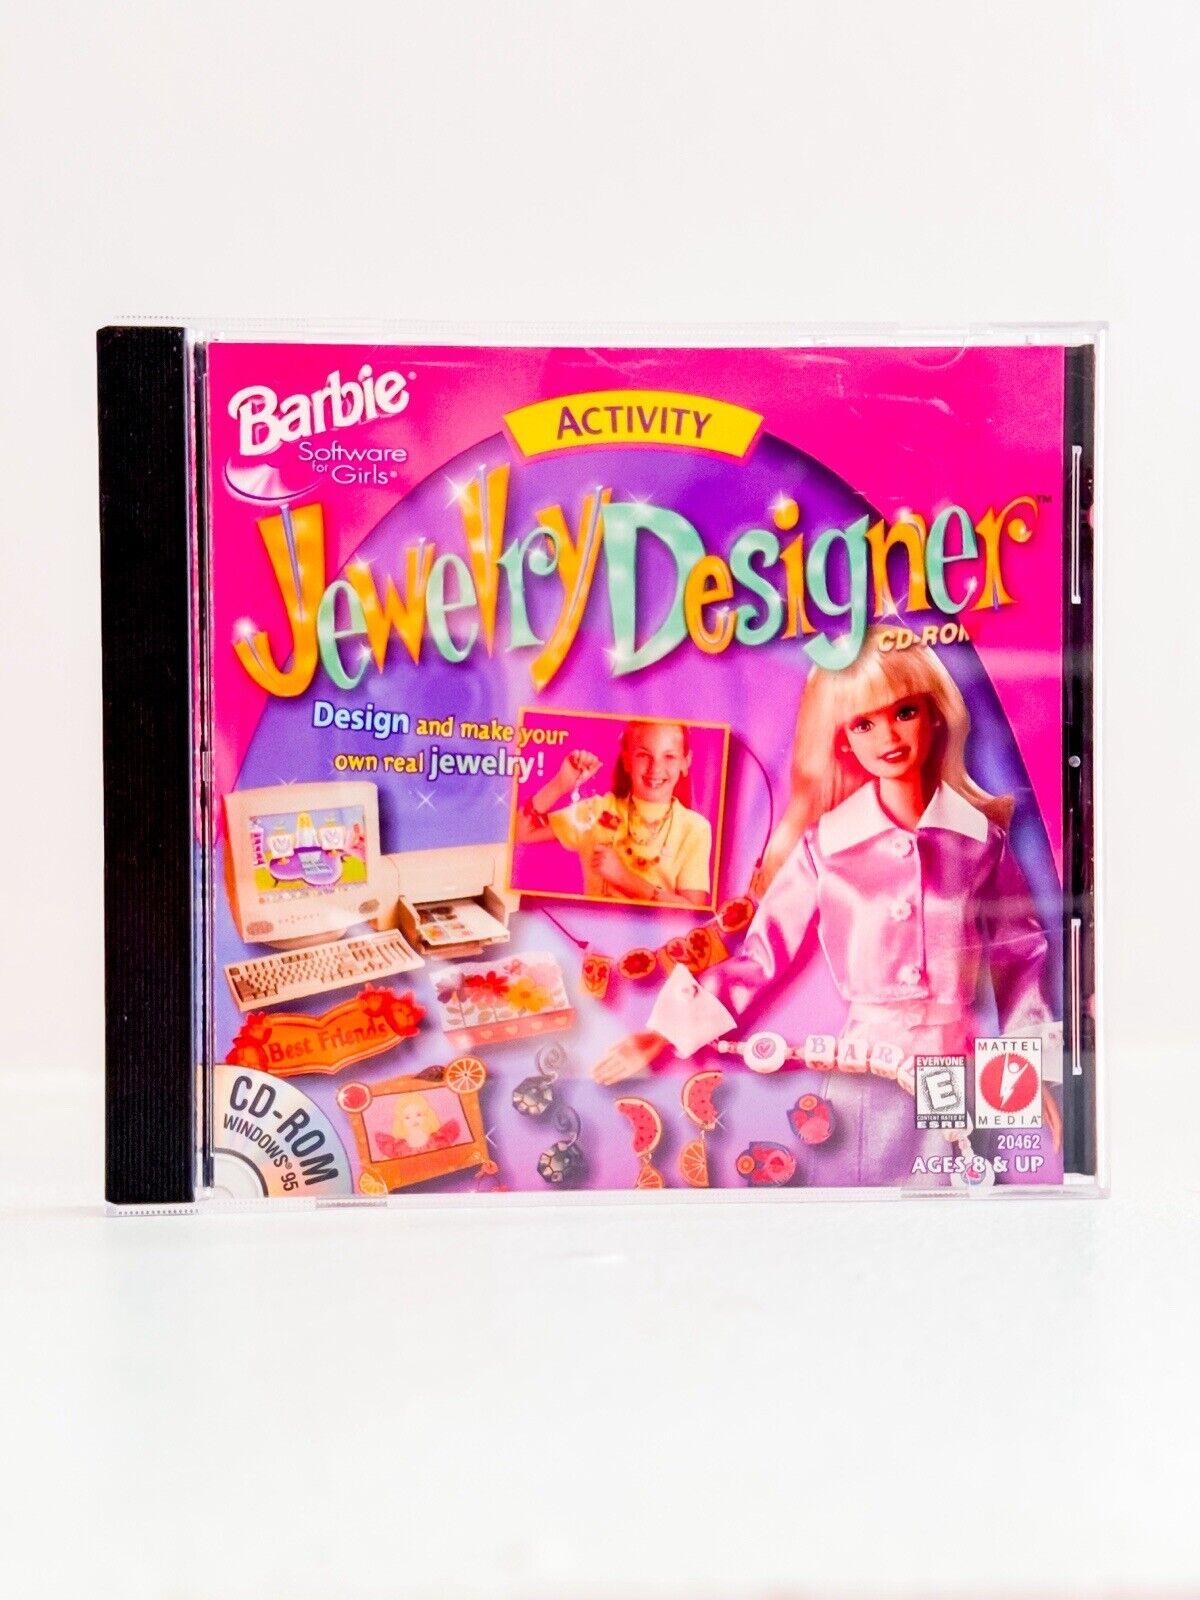 Barbie Software Activity Jewelry Designer CD-ROM Game Rated E Vintage 1998